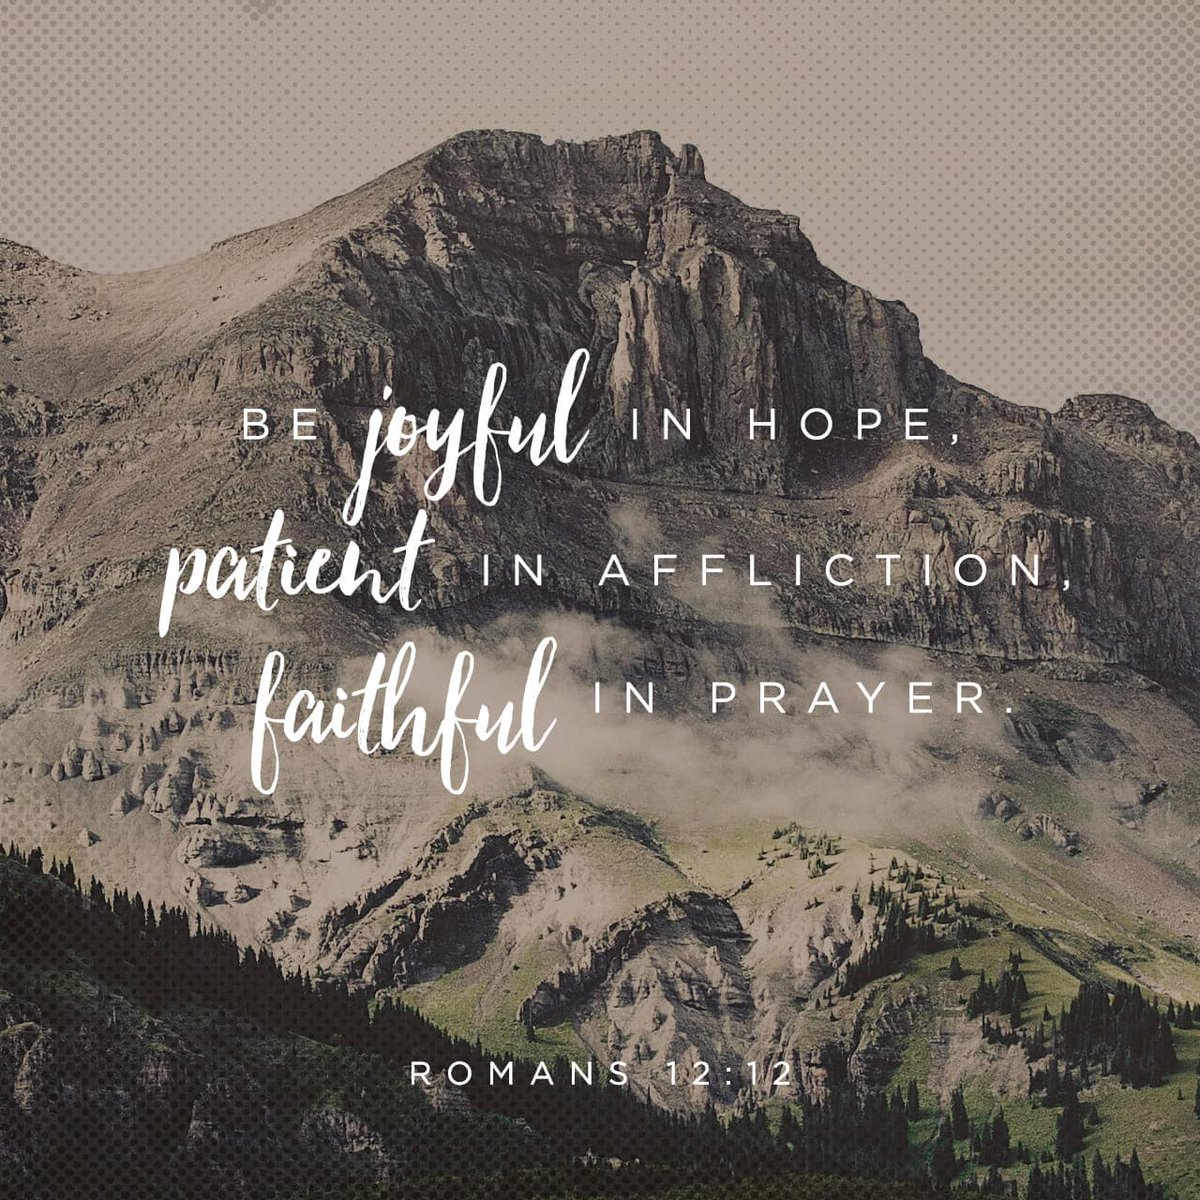 Now may the God of hope fill you with all joy and peace in believing, that you may abound in hope by the power of the Holy Spirit. Romans 15:13